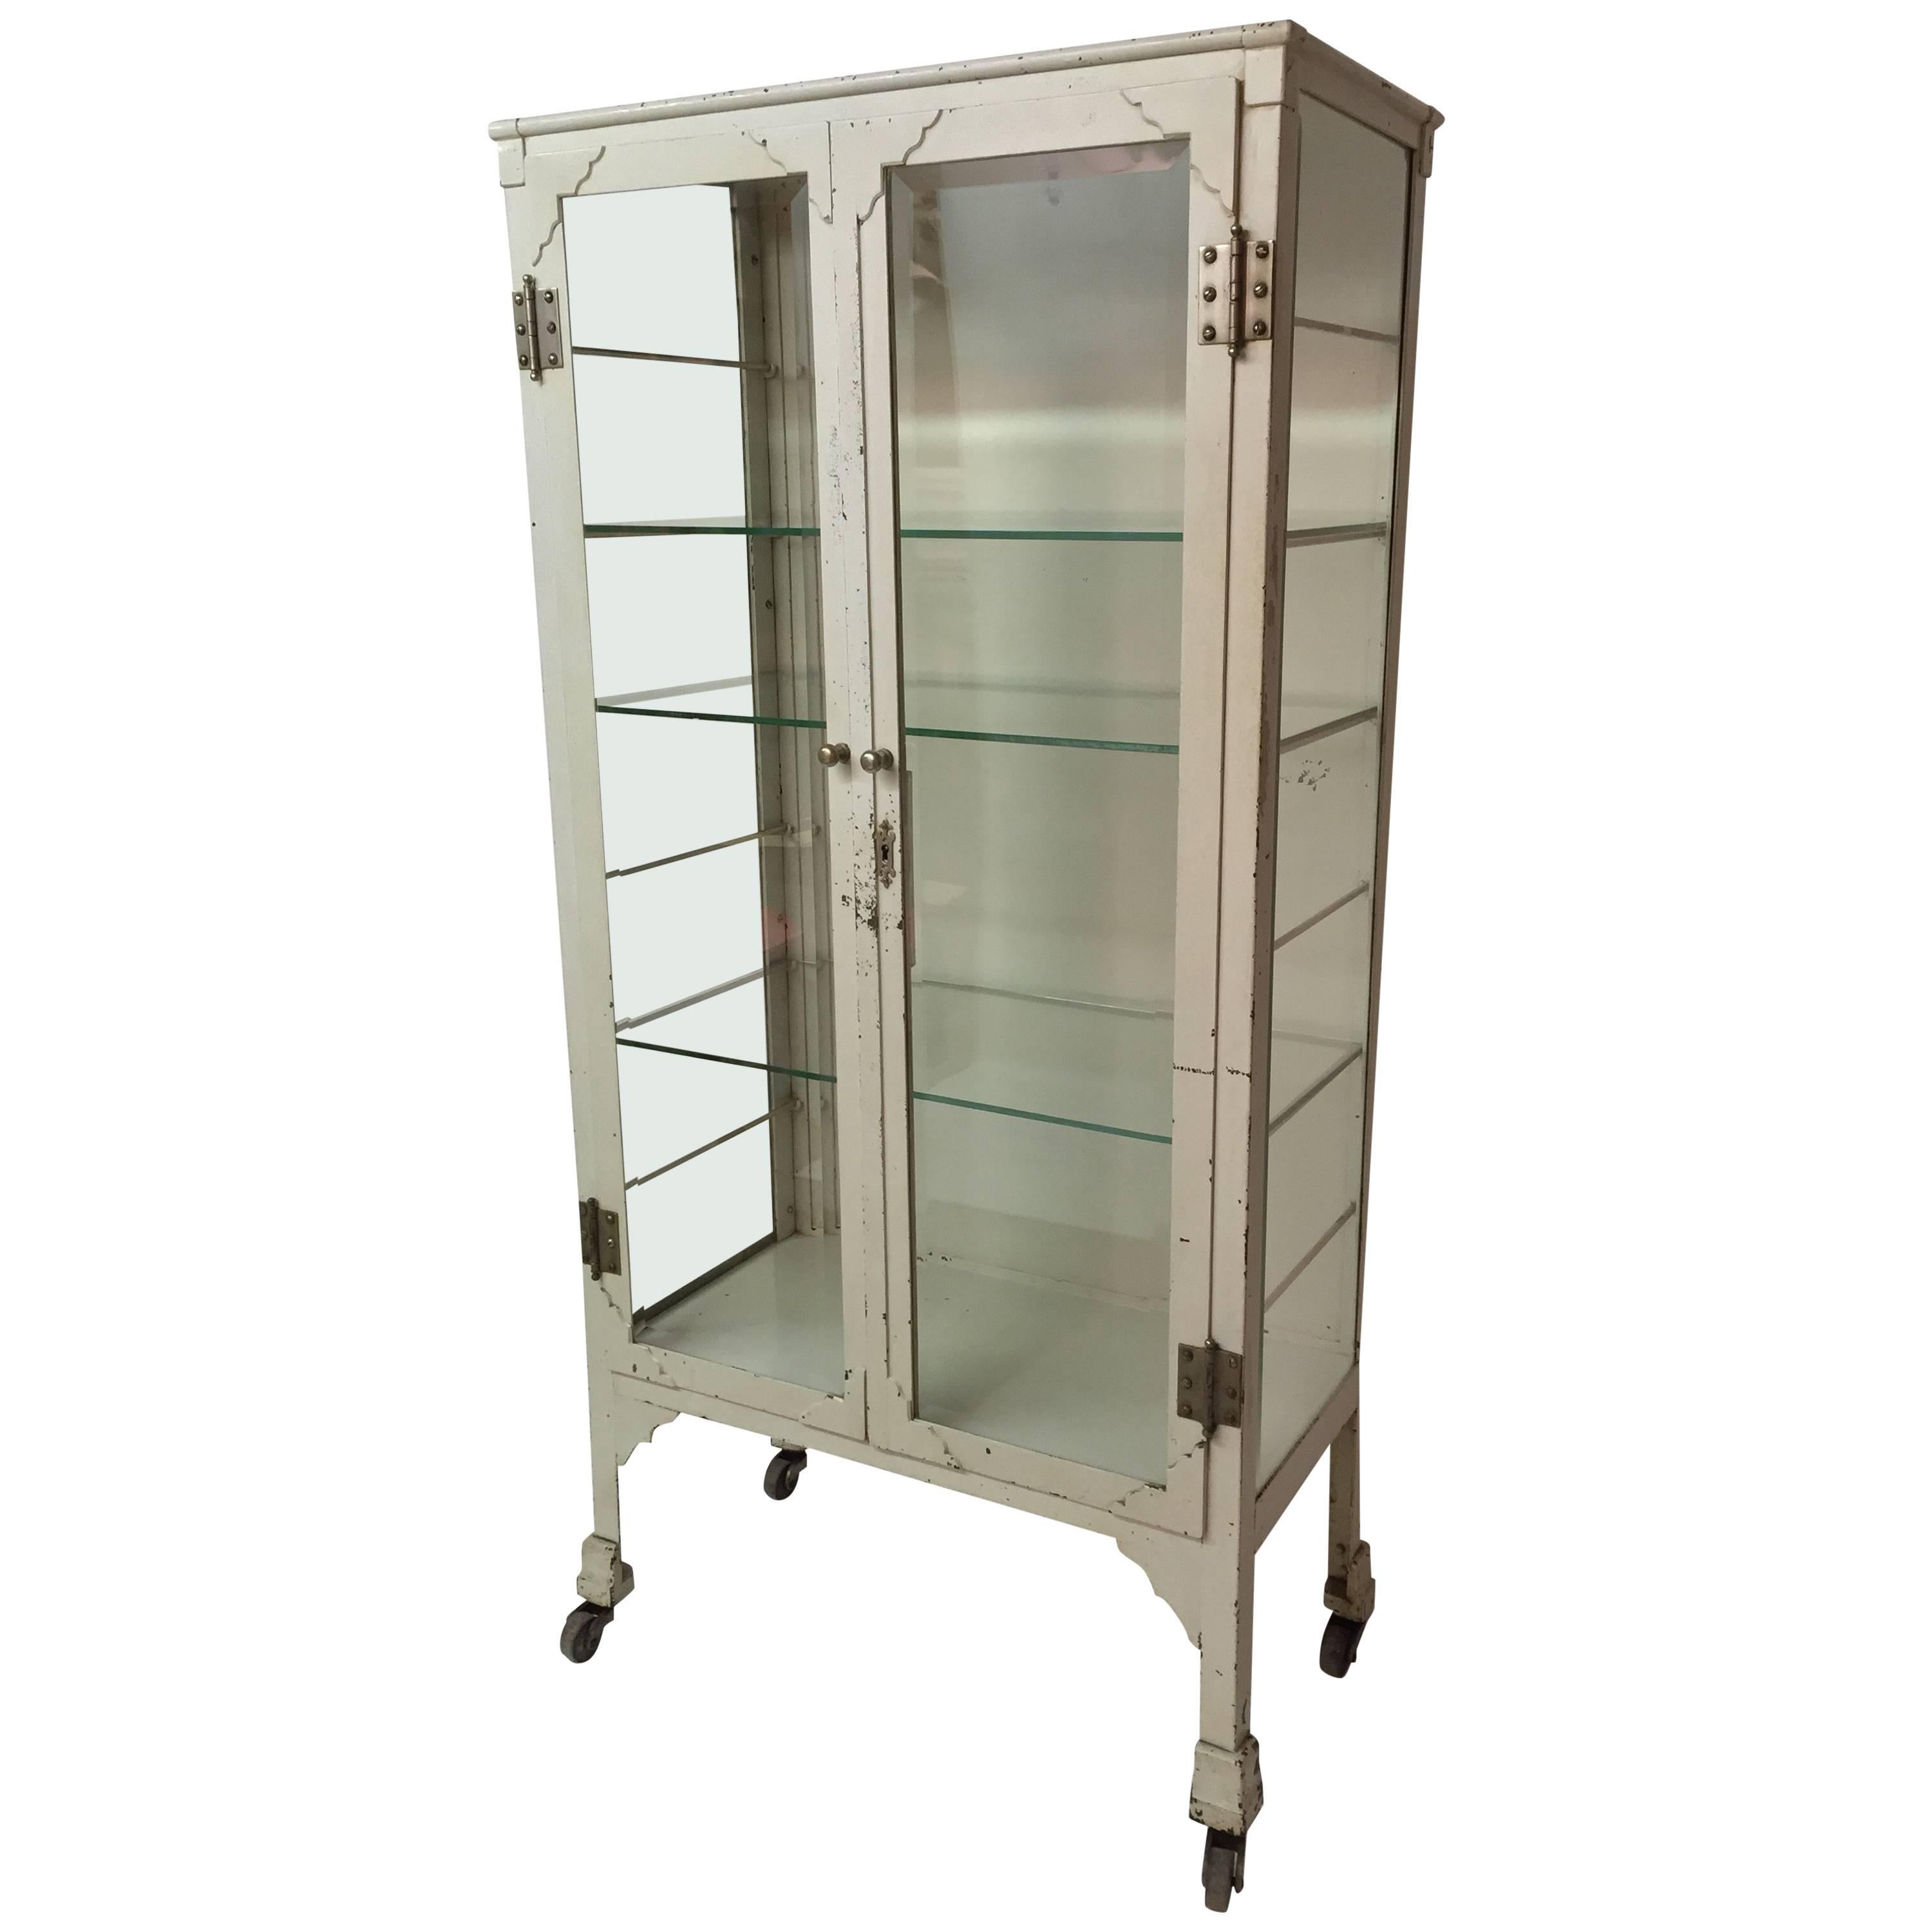 1920s Steel and Bevel Glass Medical Cabinet